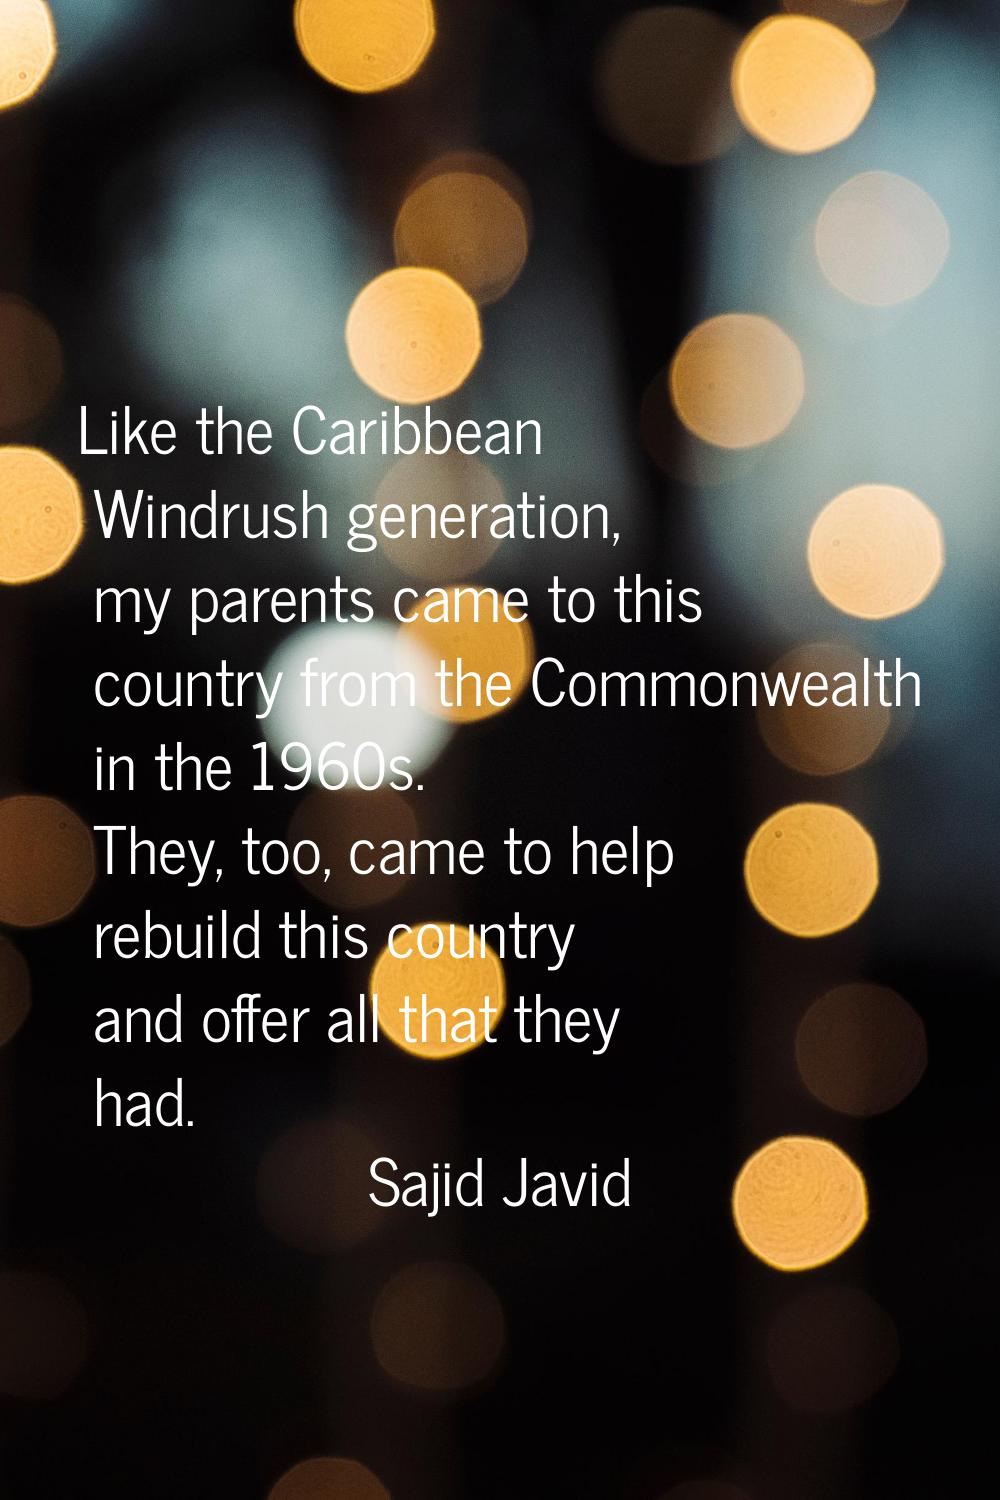 Like the Caribbean Windrush generation, my parents came to this country from the Commonwealth in th